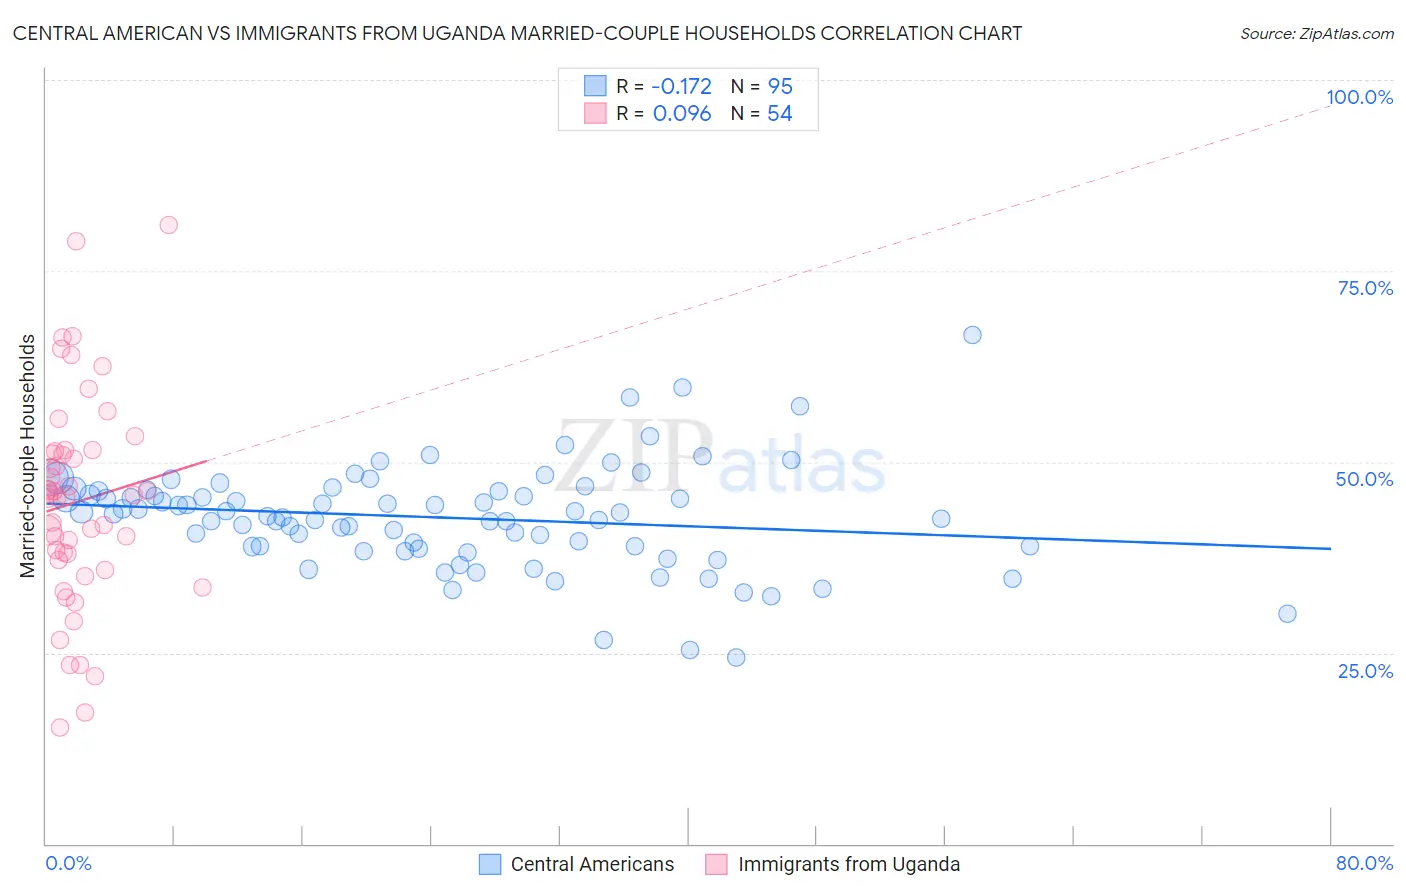 Central American vs Immigrants from Uganda Married-couple Households